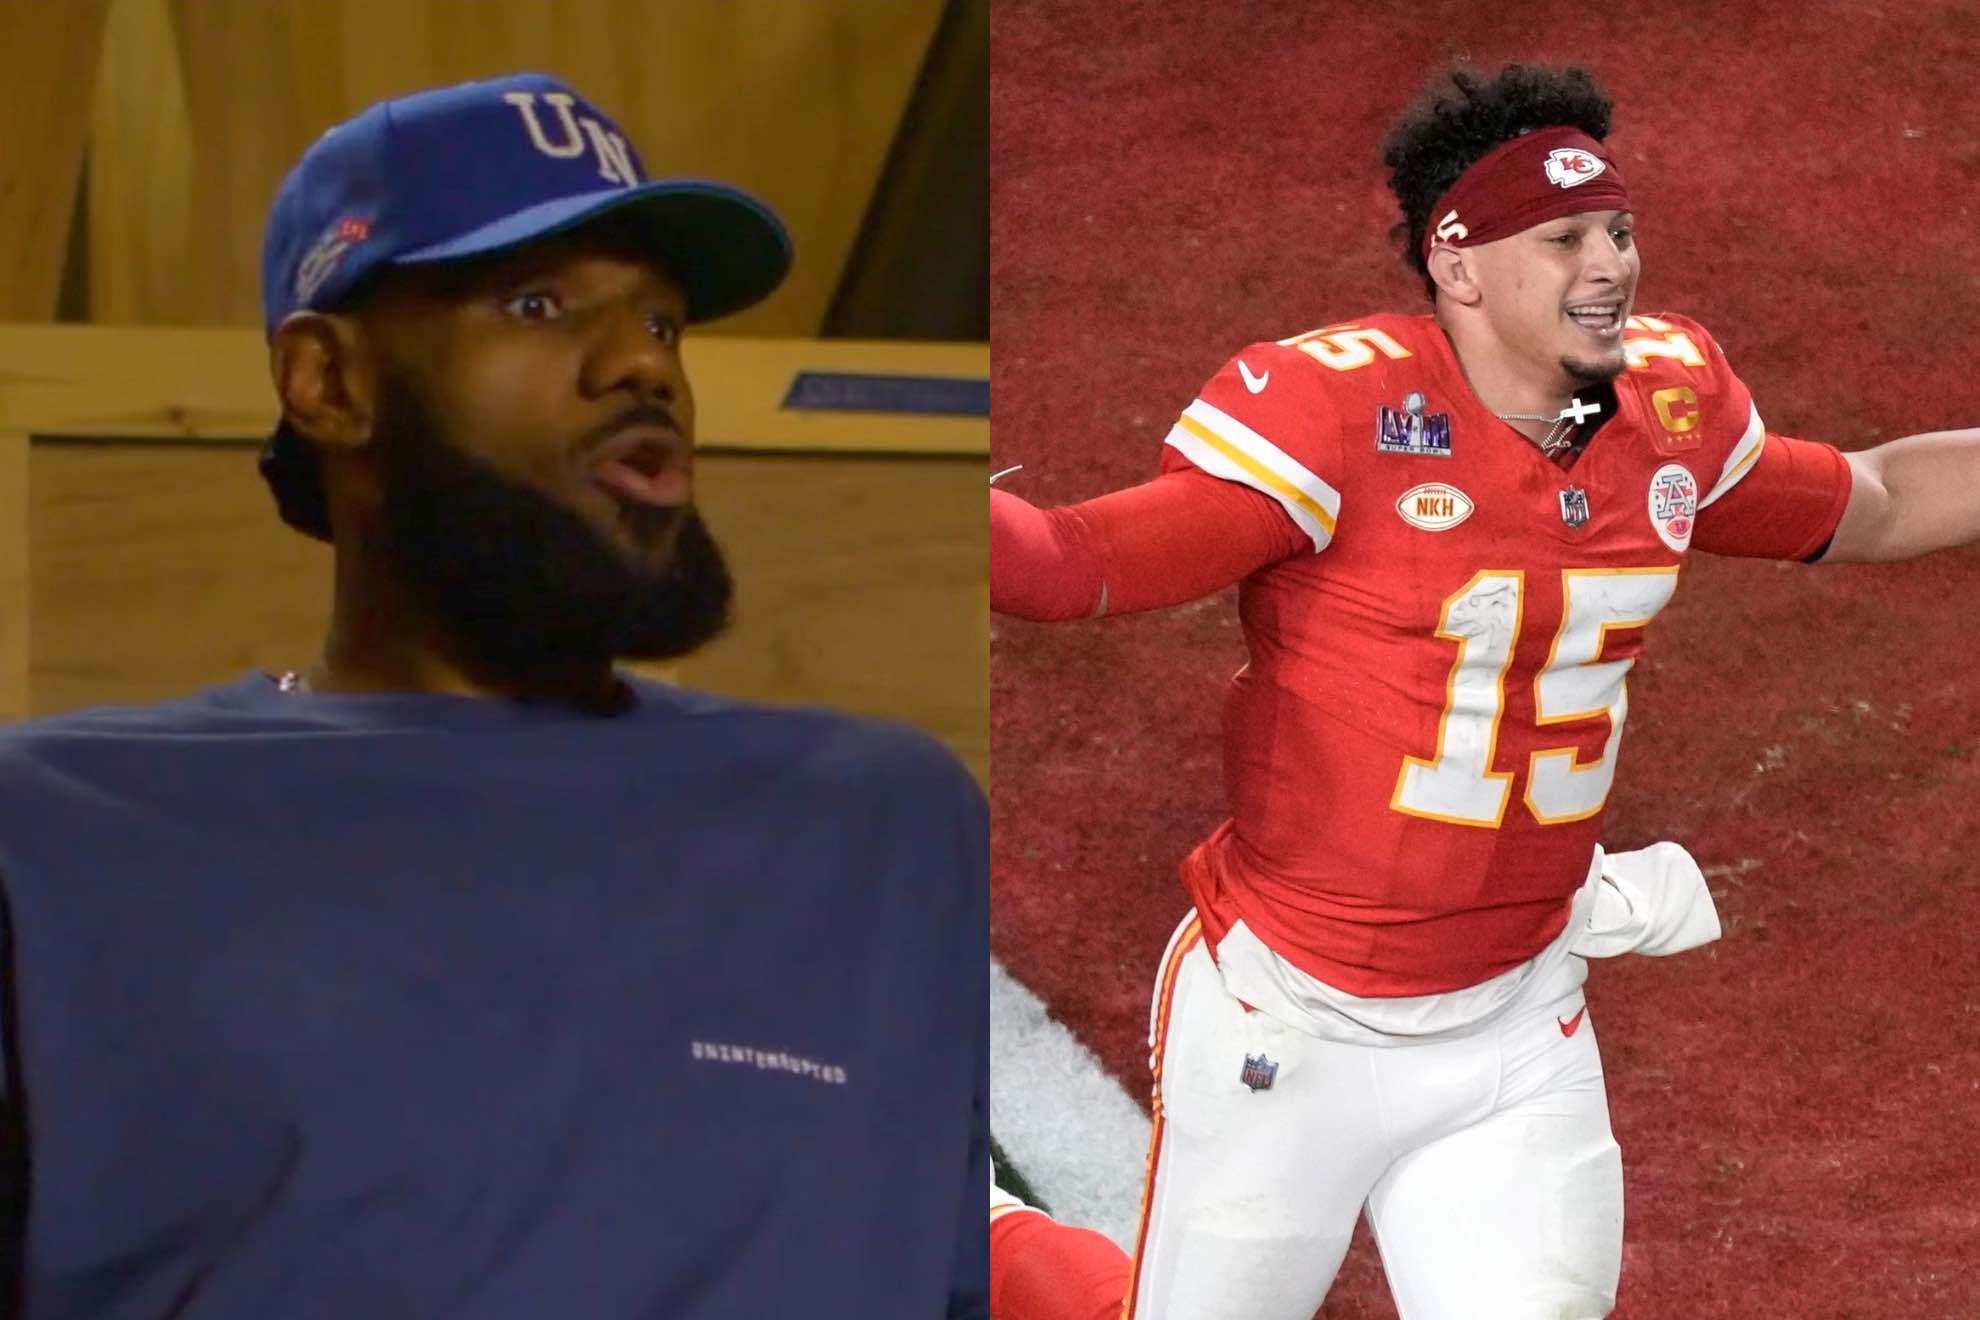 LeBron James brought up Patrick Mahomes on his podcast